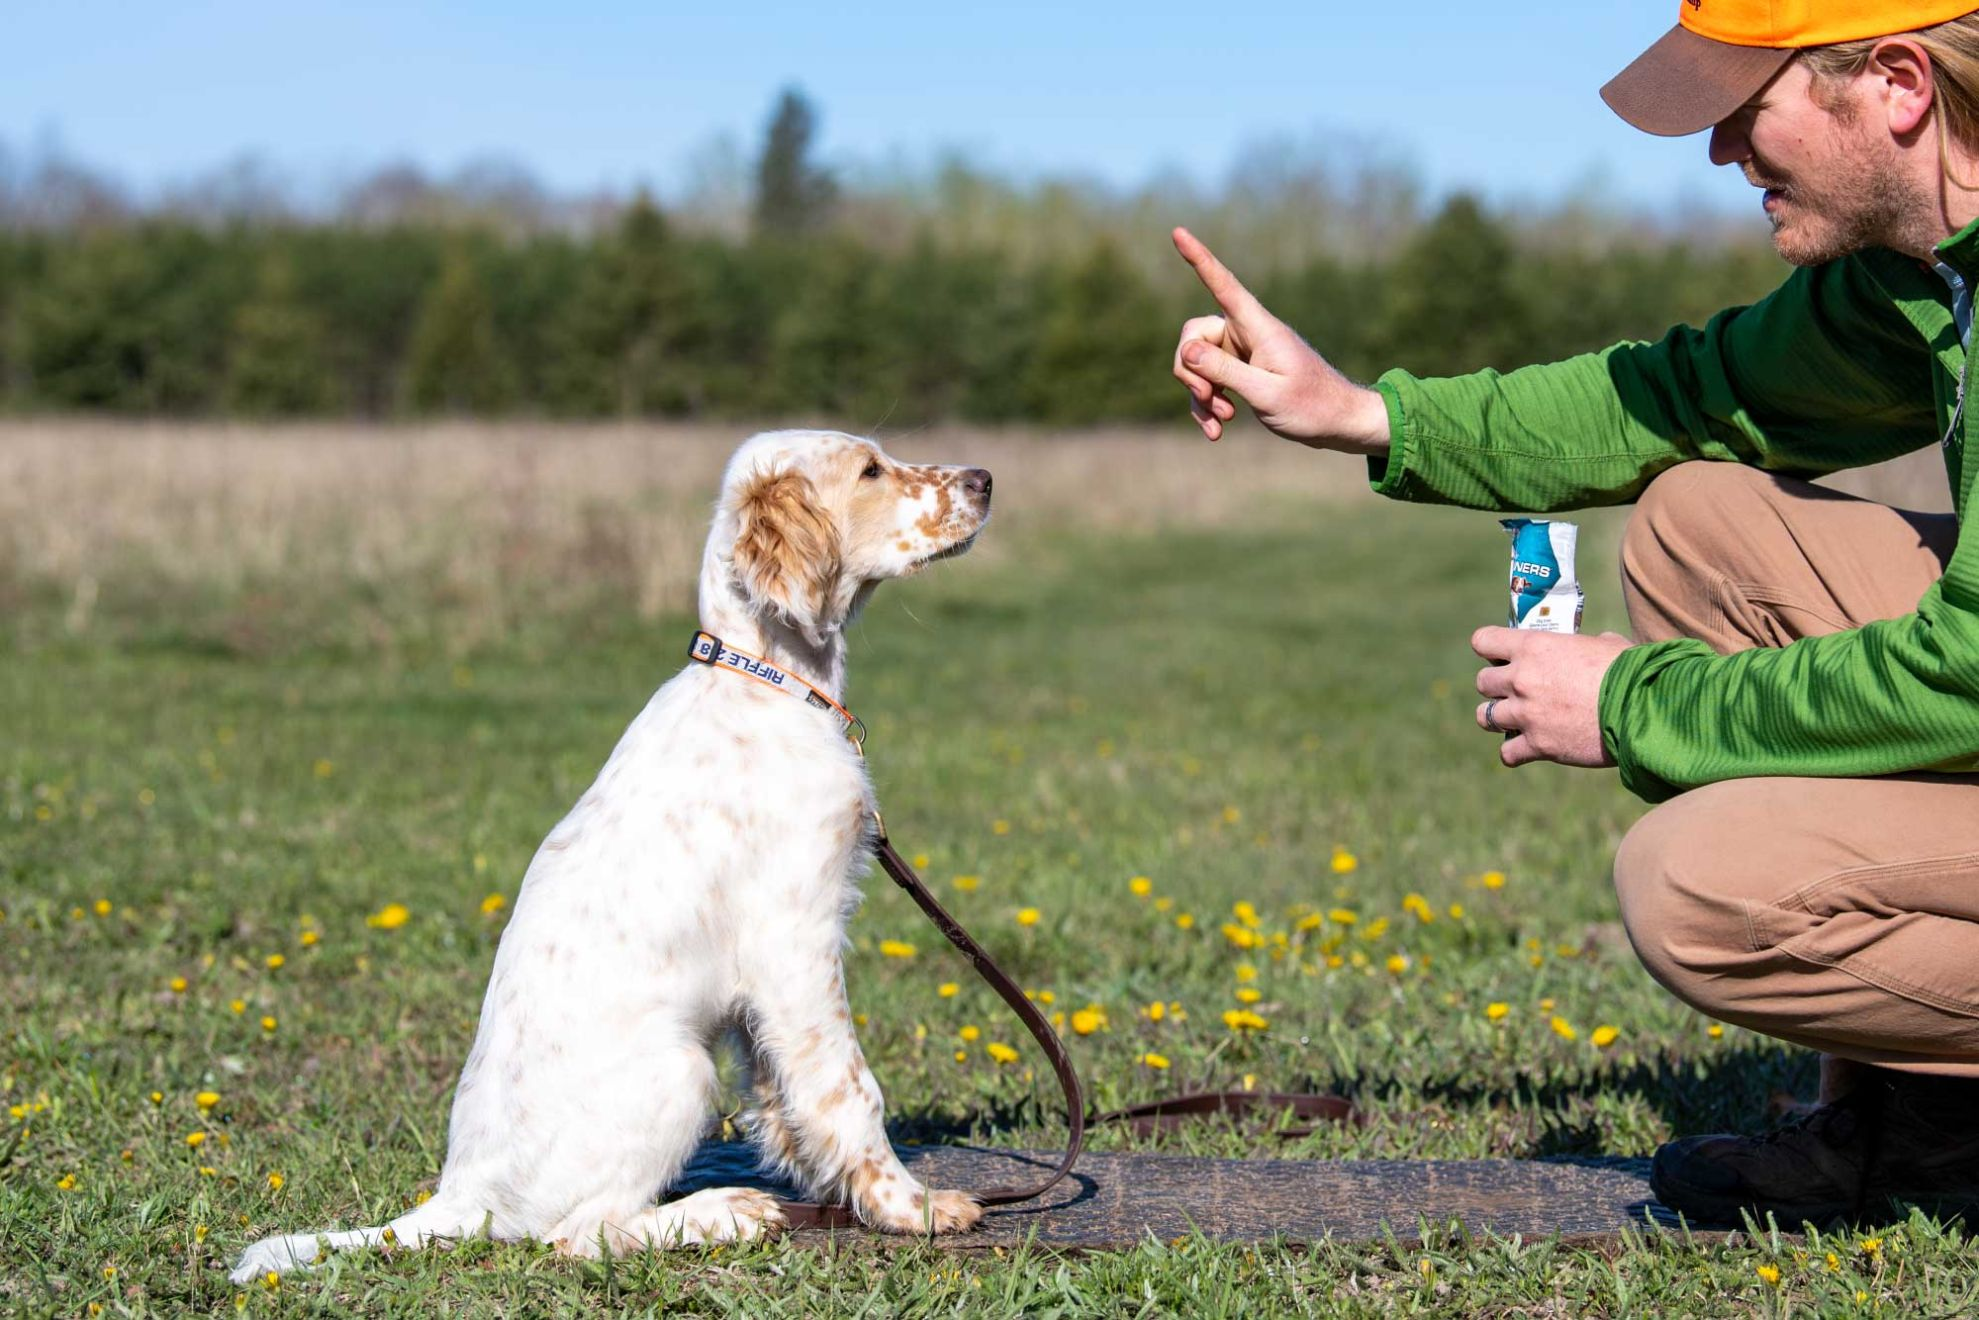 https://cdn.royalcanin-weshare-online.io/kT-5JIEBRYZmsWpcQts-/v3/us-esd-owner-working-with-english-setter-puppy-on-obedience-training-as-a-way-to-stimulate-the-puppy-s-mind